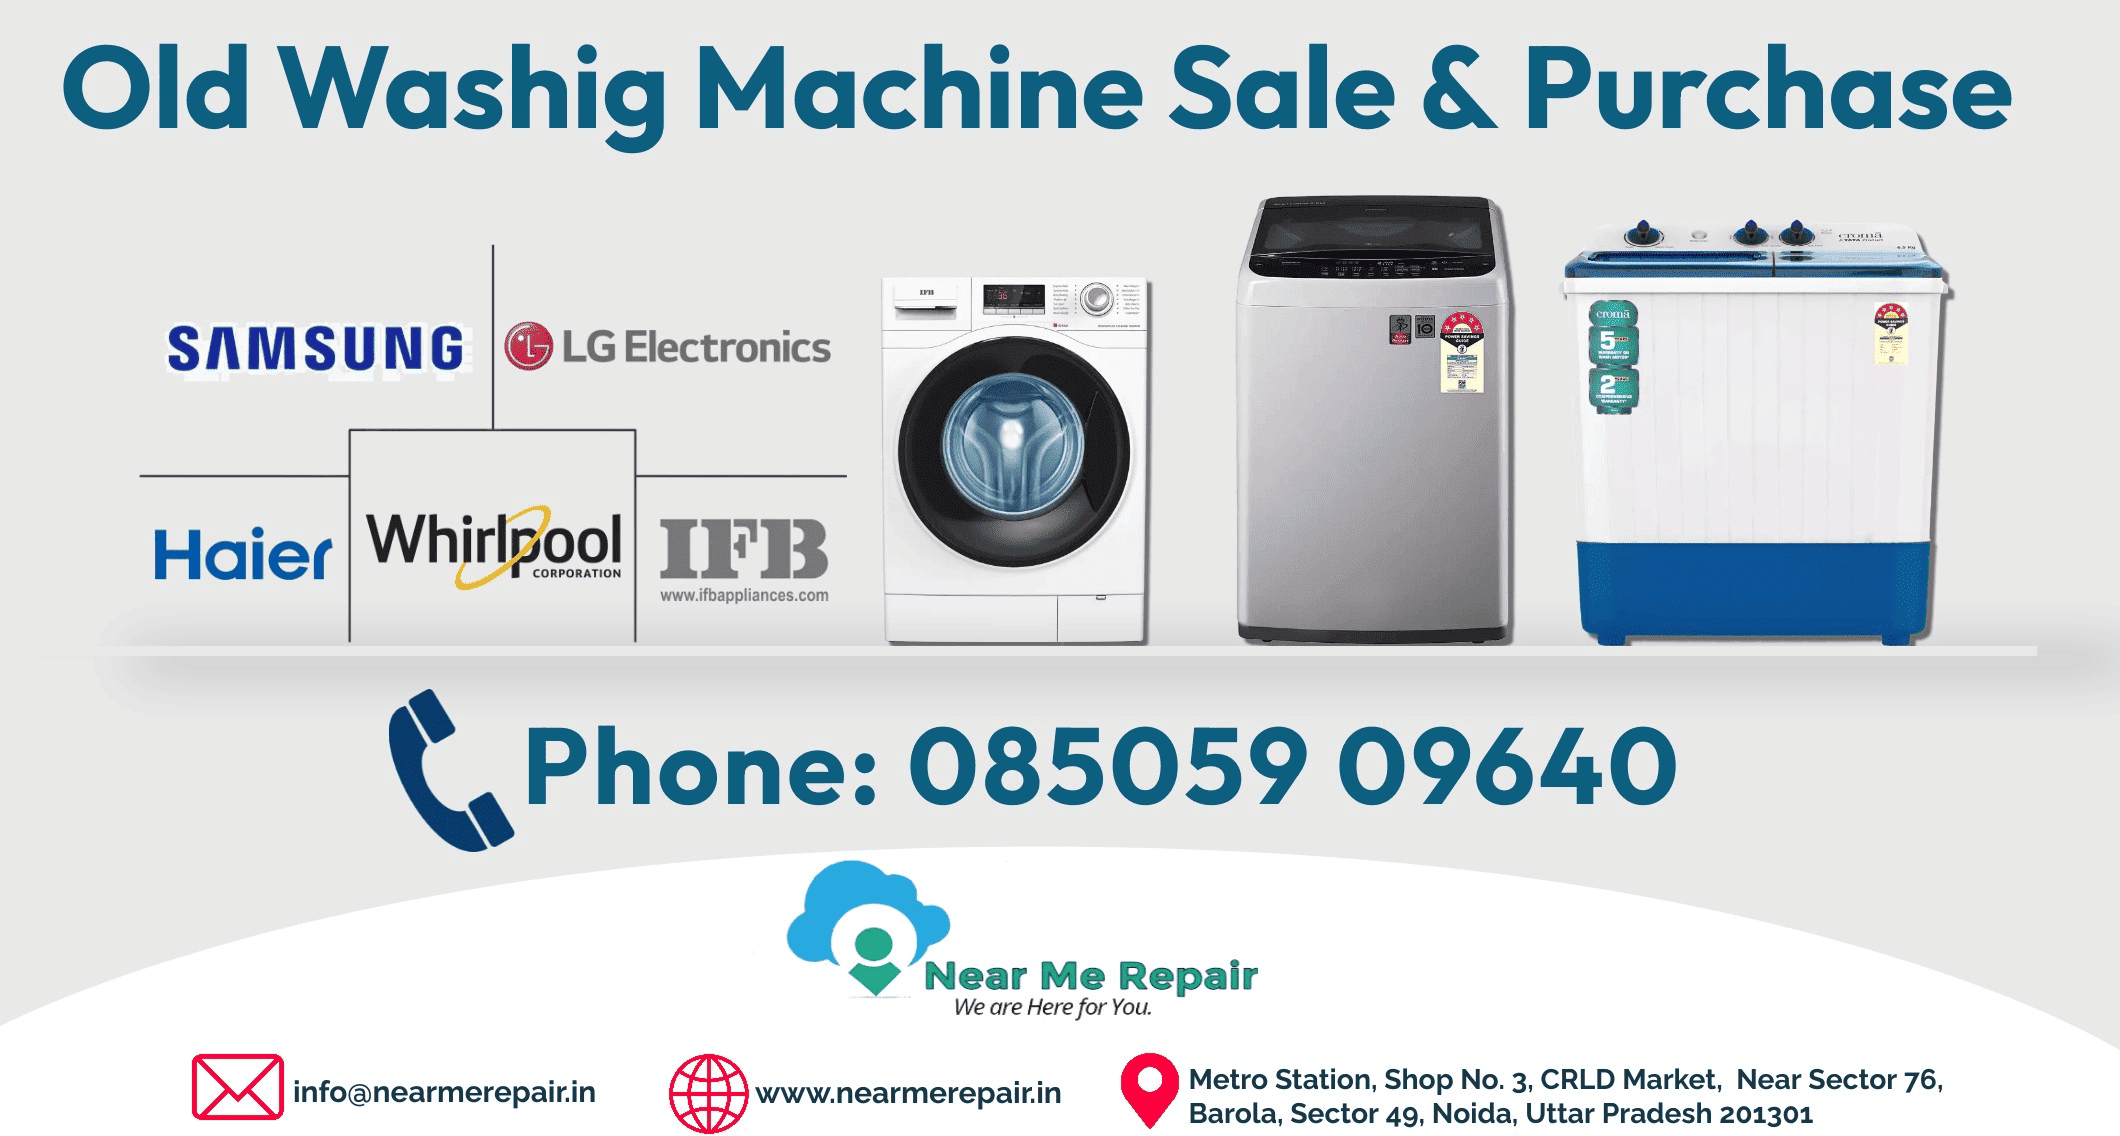 Explore smooth transactions for buying and selling pre-owned washing machines near Delhi-NCR.